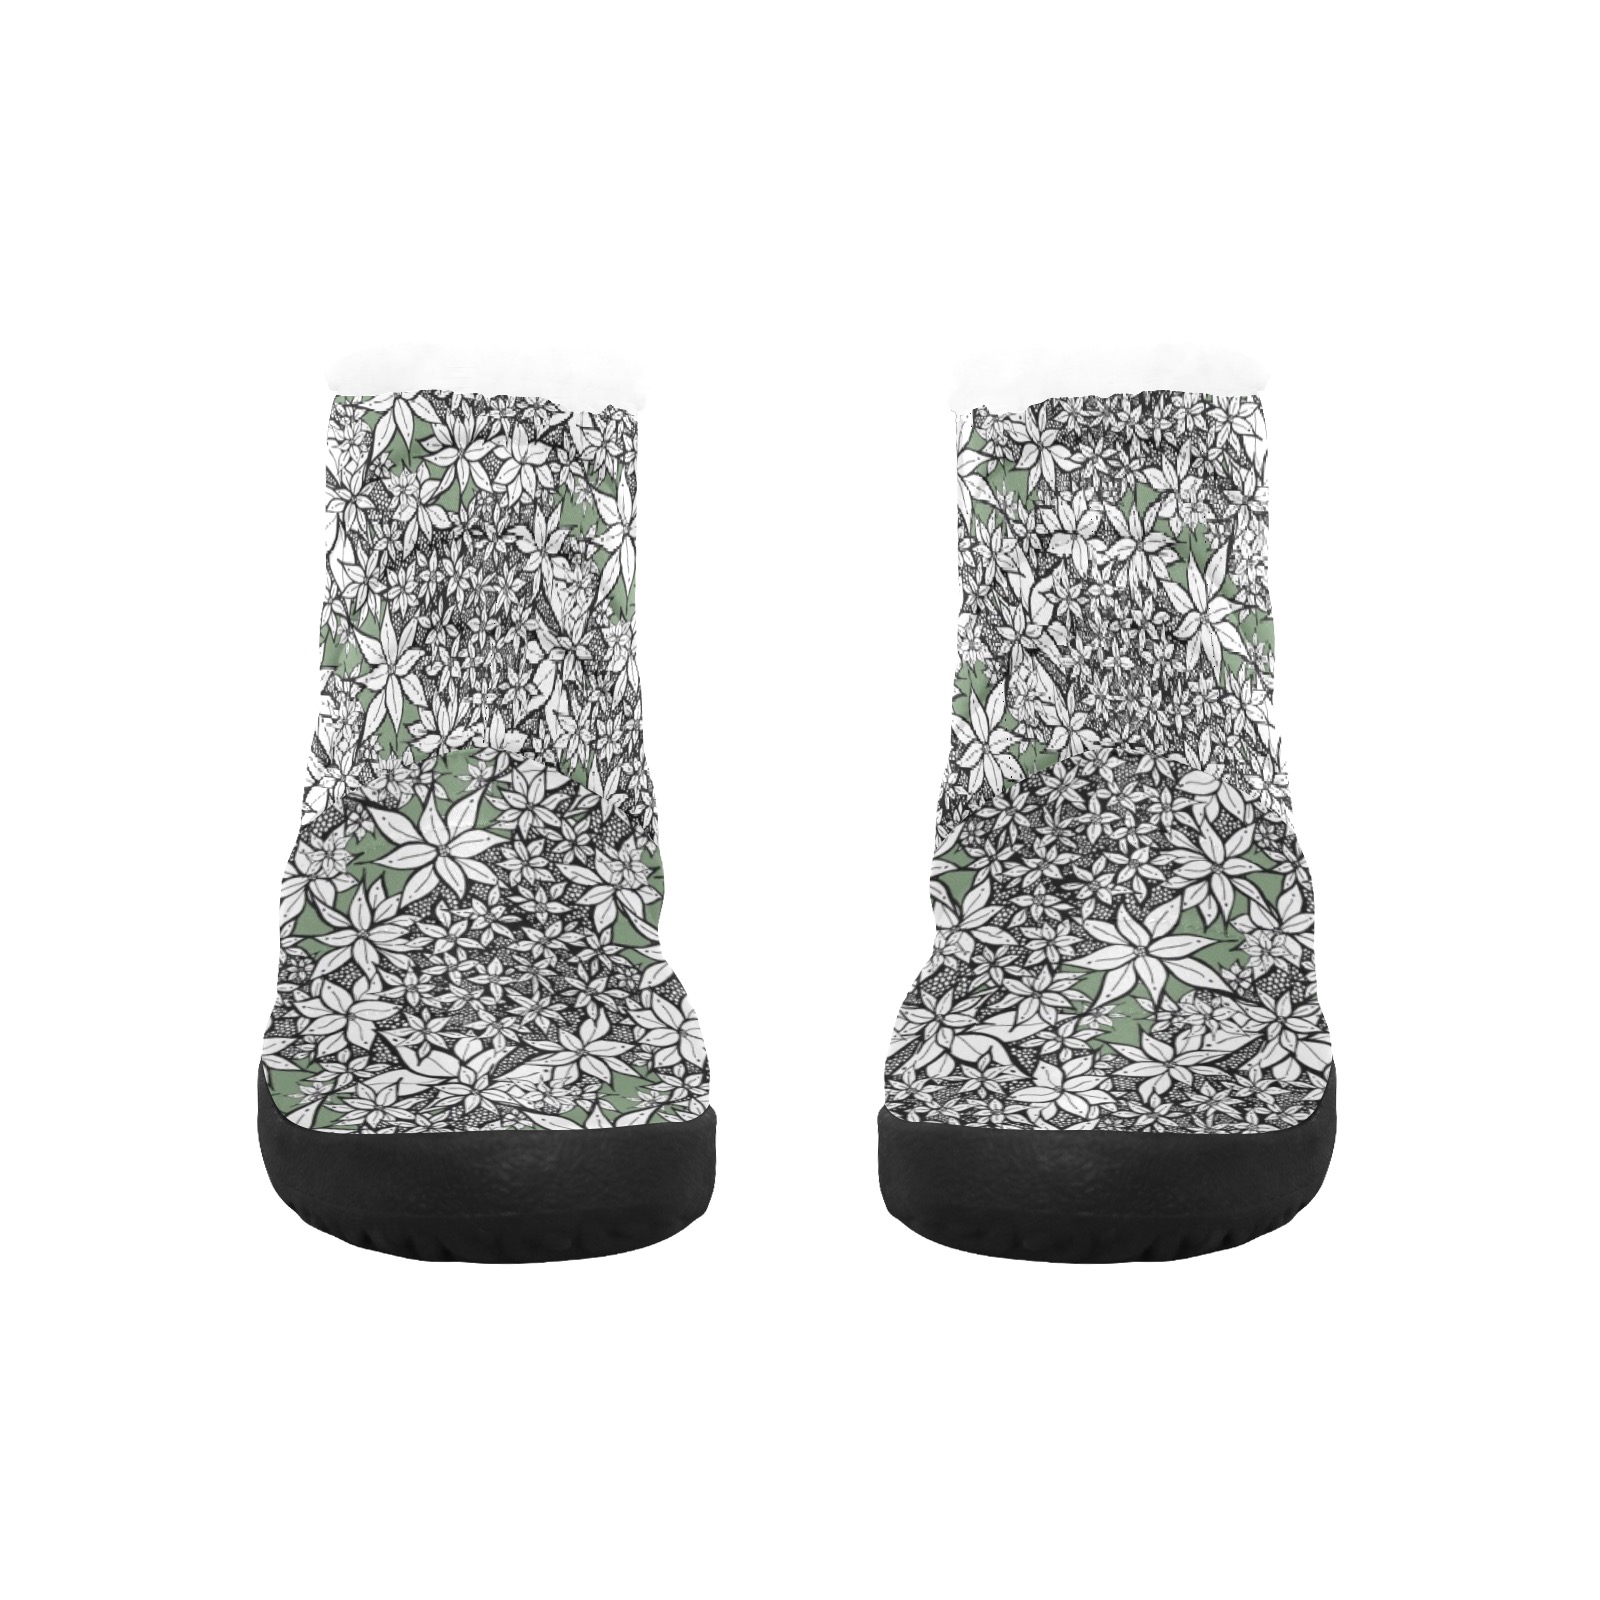 Petals in the Wind Green Women's Cotton-Padded Shoes (Model 19291)